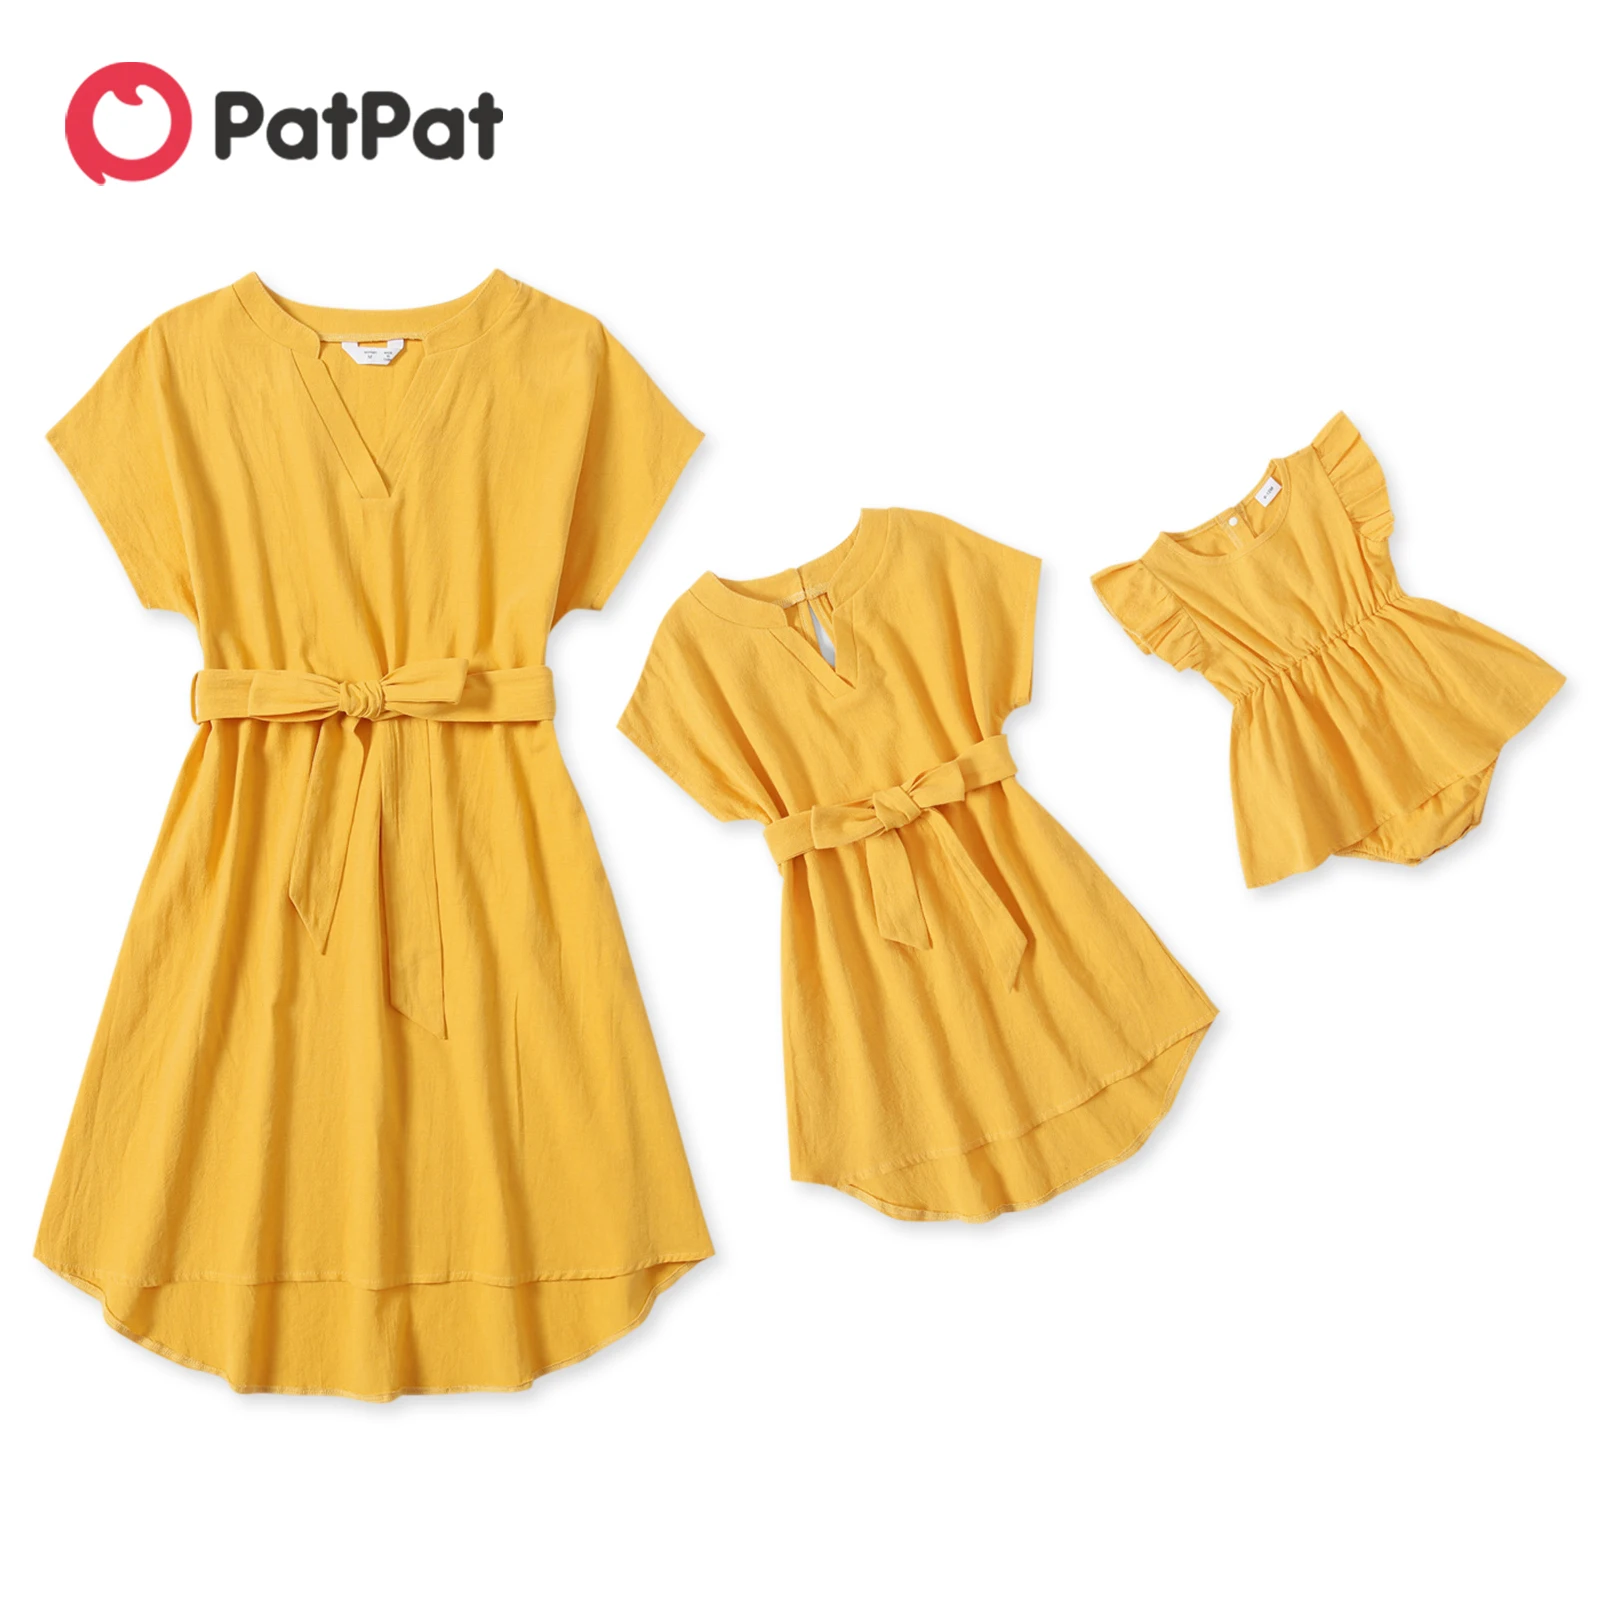 

PatPat 100% Cotton Yellow V Neck Short-sleeve Belted Dress for Mom and Me